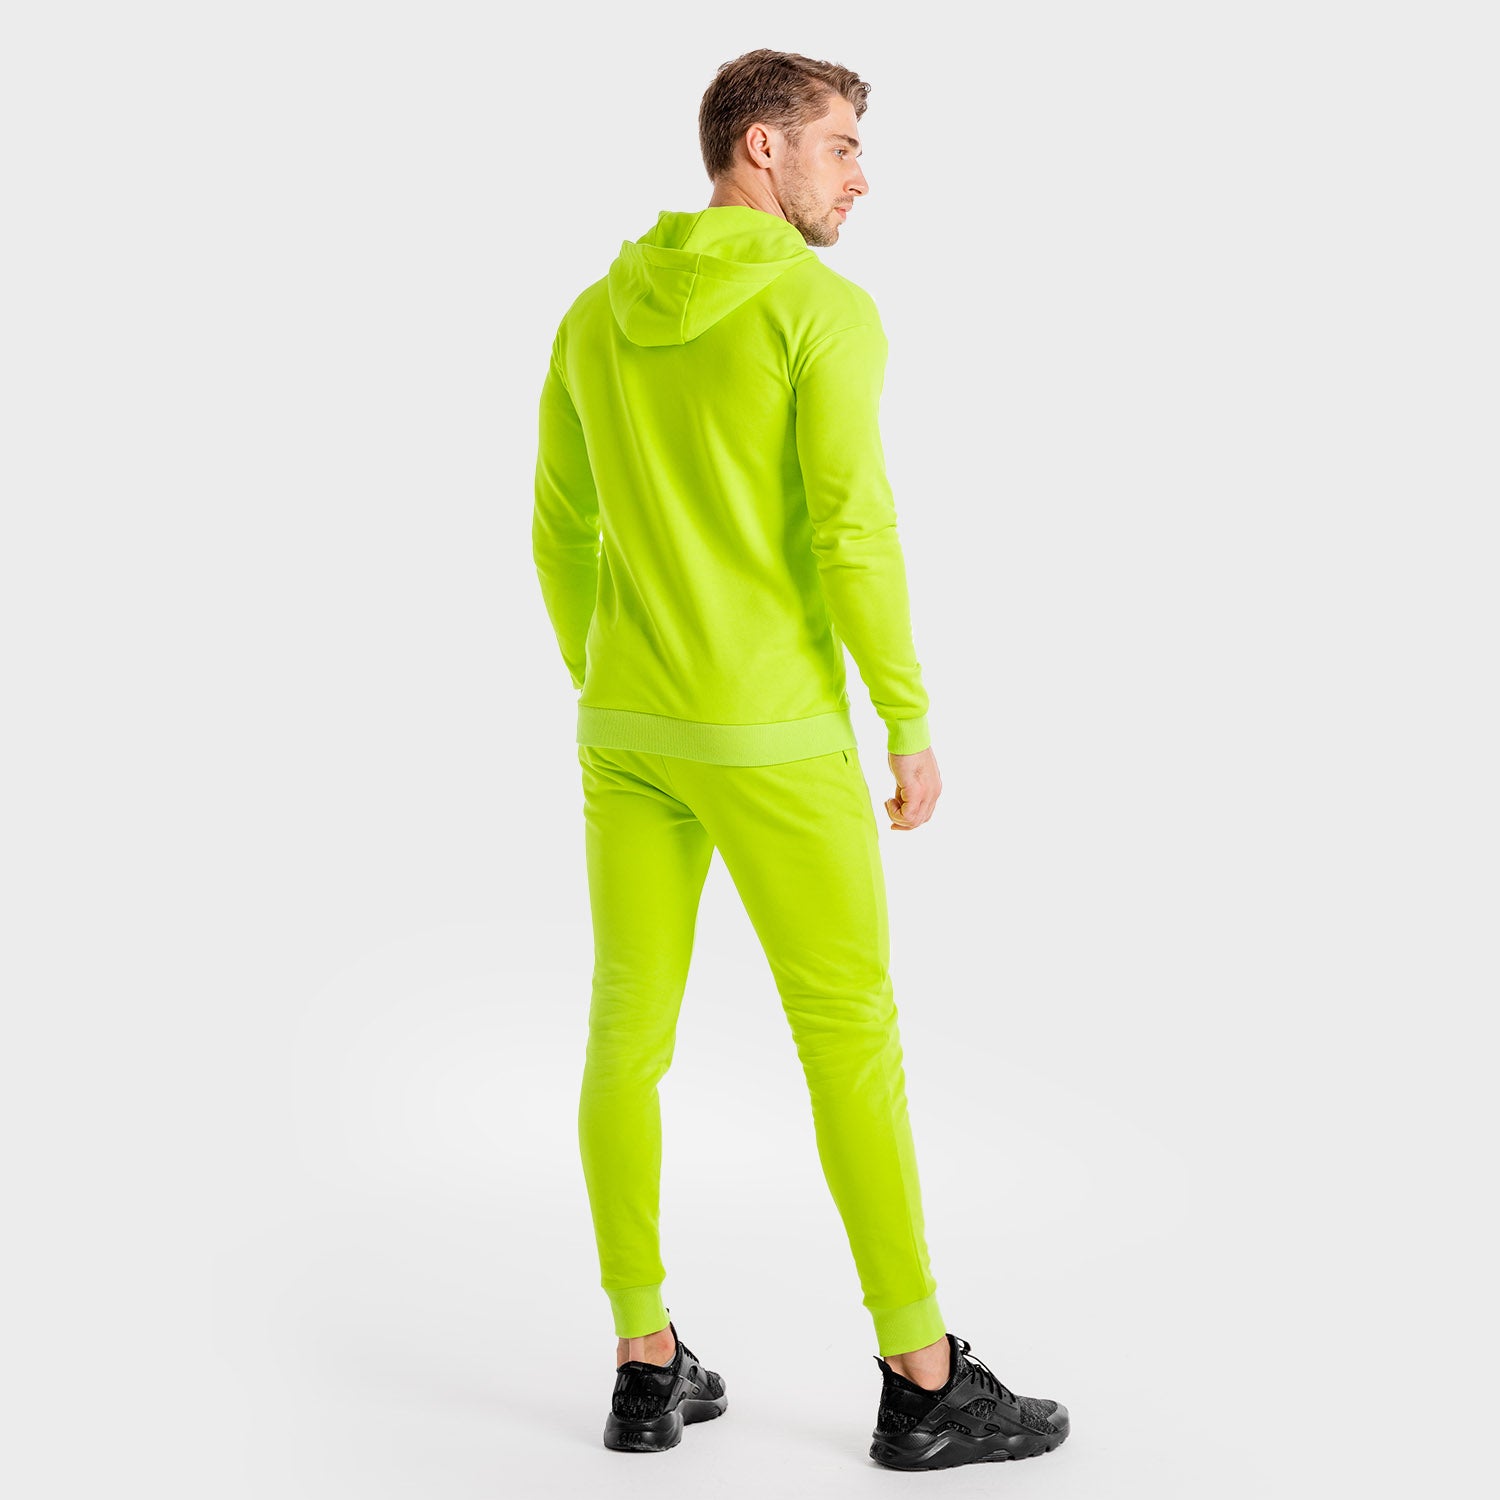 squatwolf-gym-wear-core-cuffed-joggers-neon-workout-pants-for-men